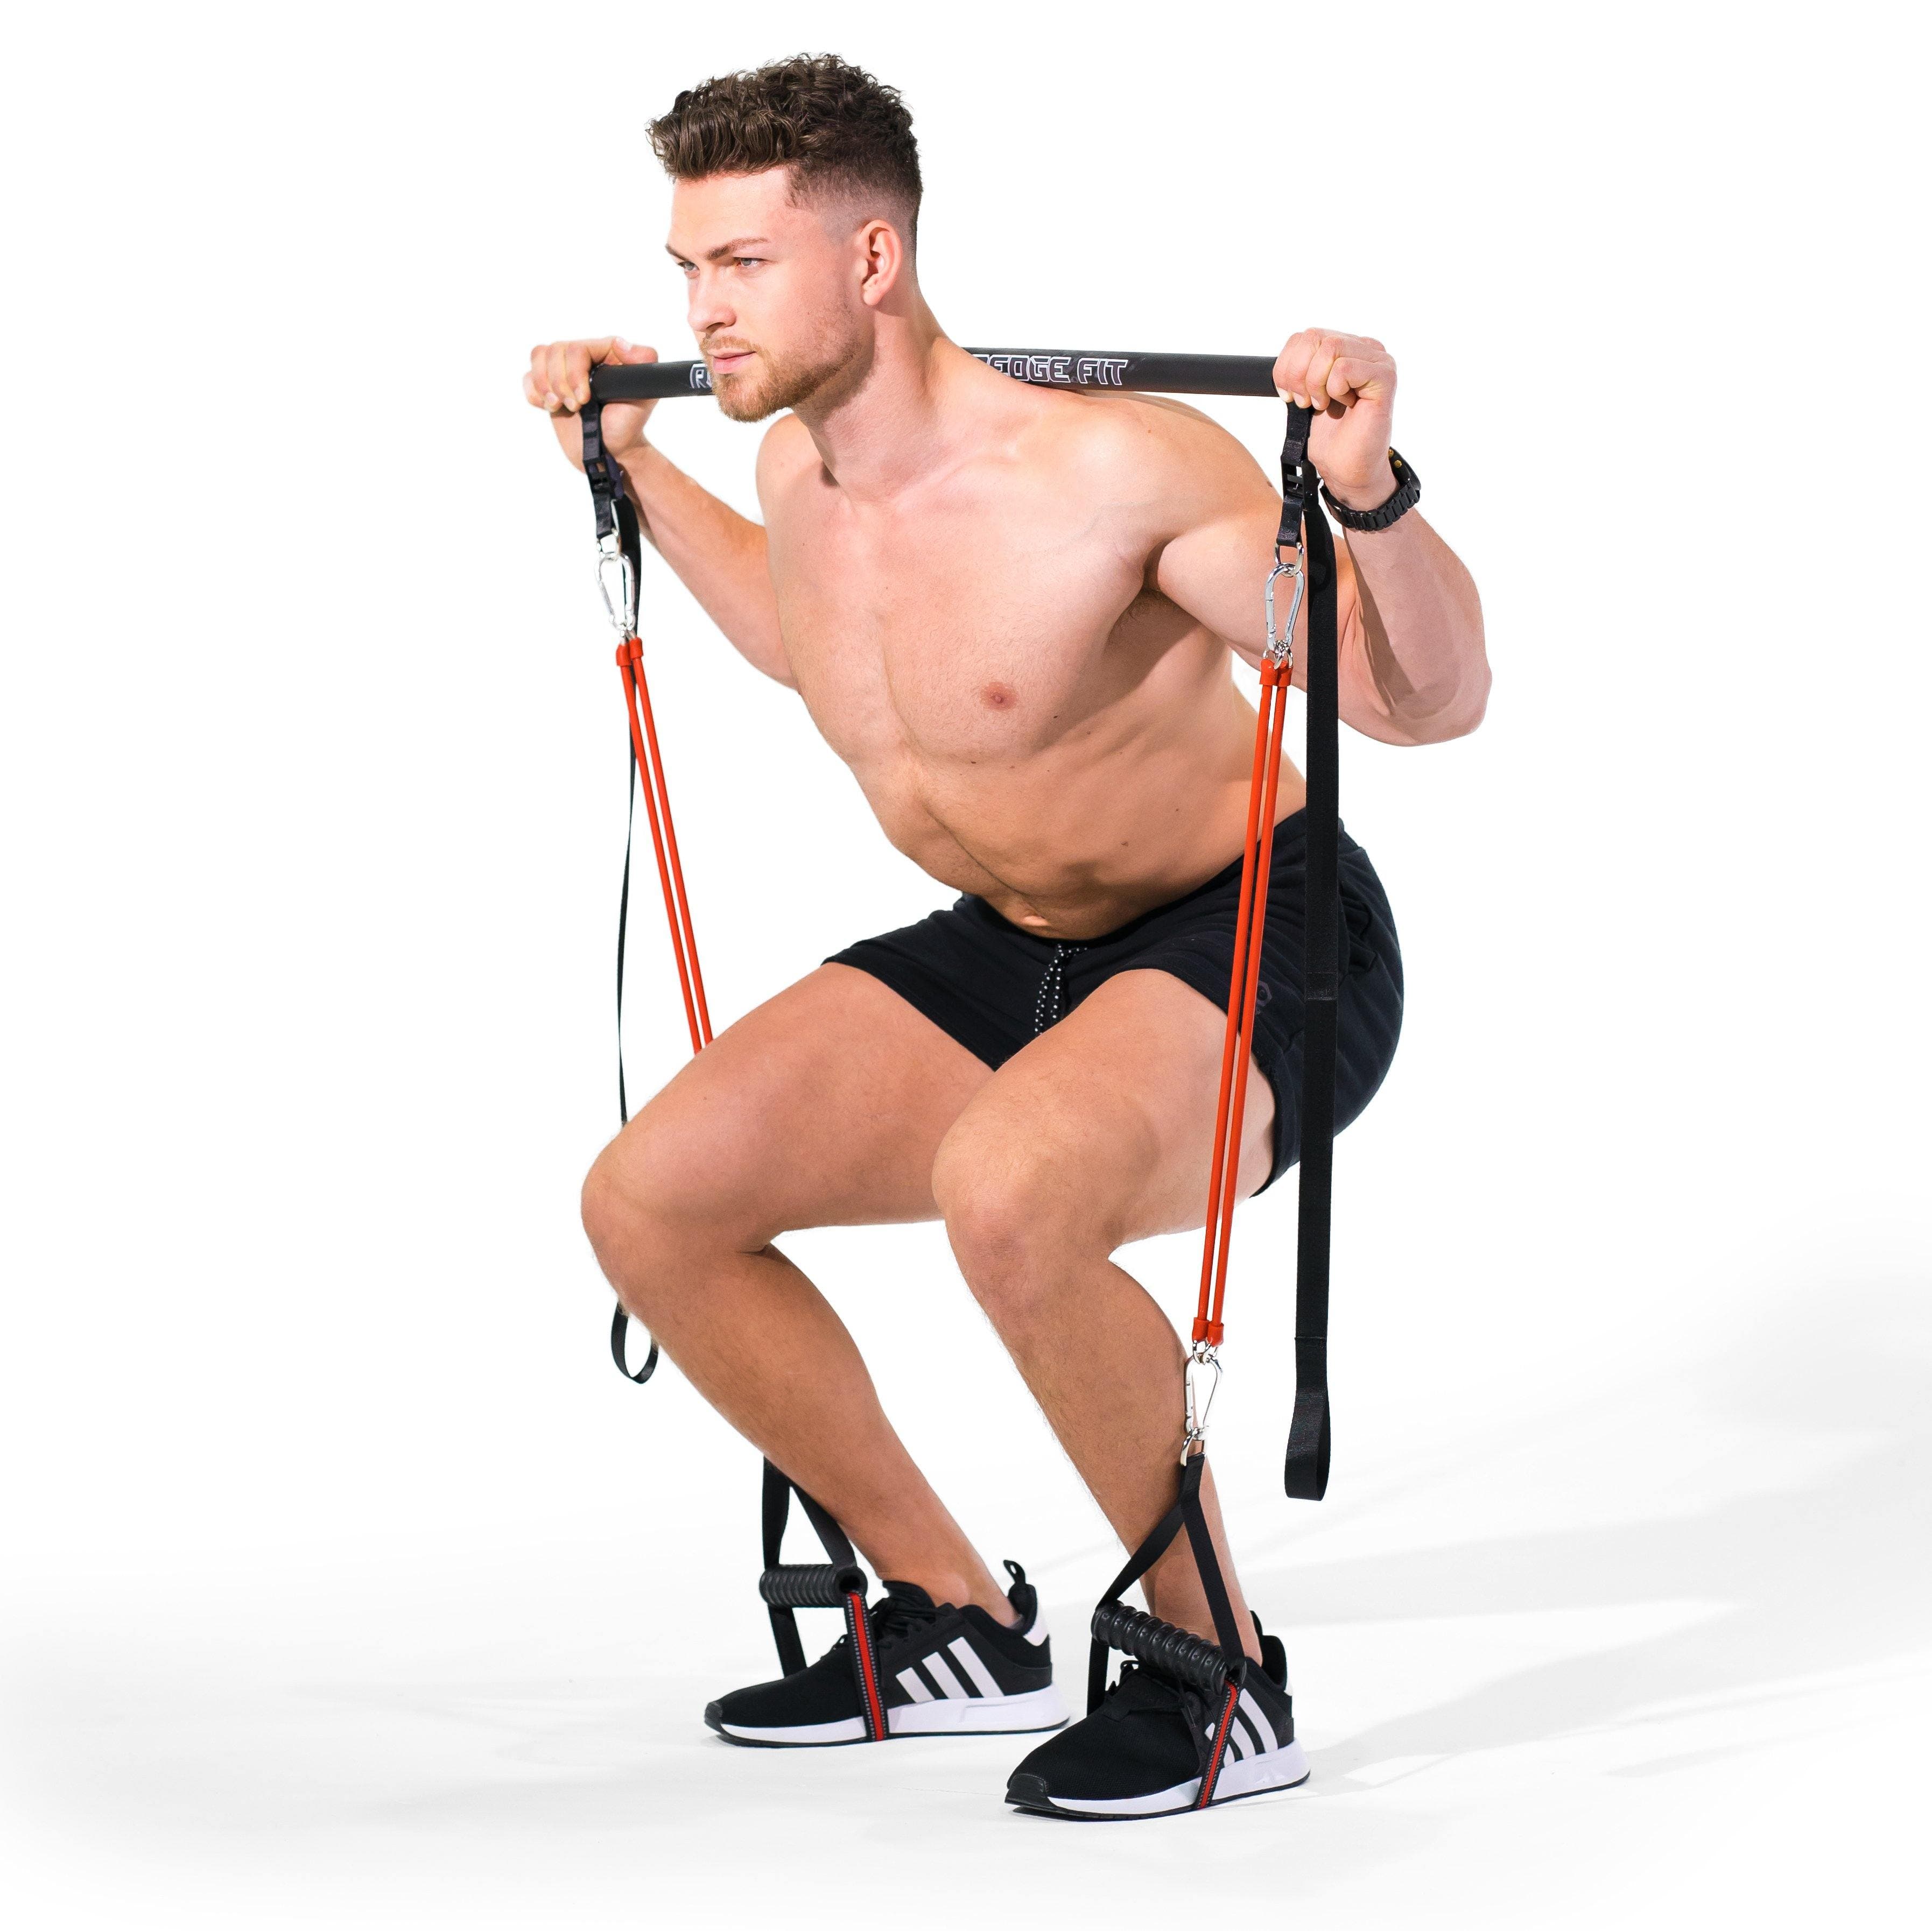 Man modeling the Redge Fit Portable Gym Machine Available at https://www.getredge.com/products/portable-gym-system